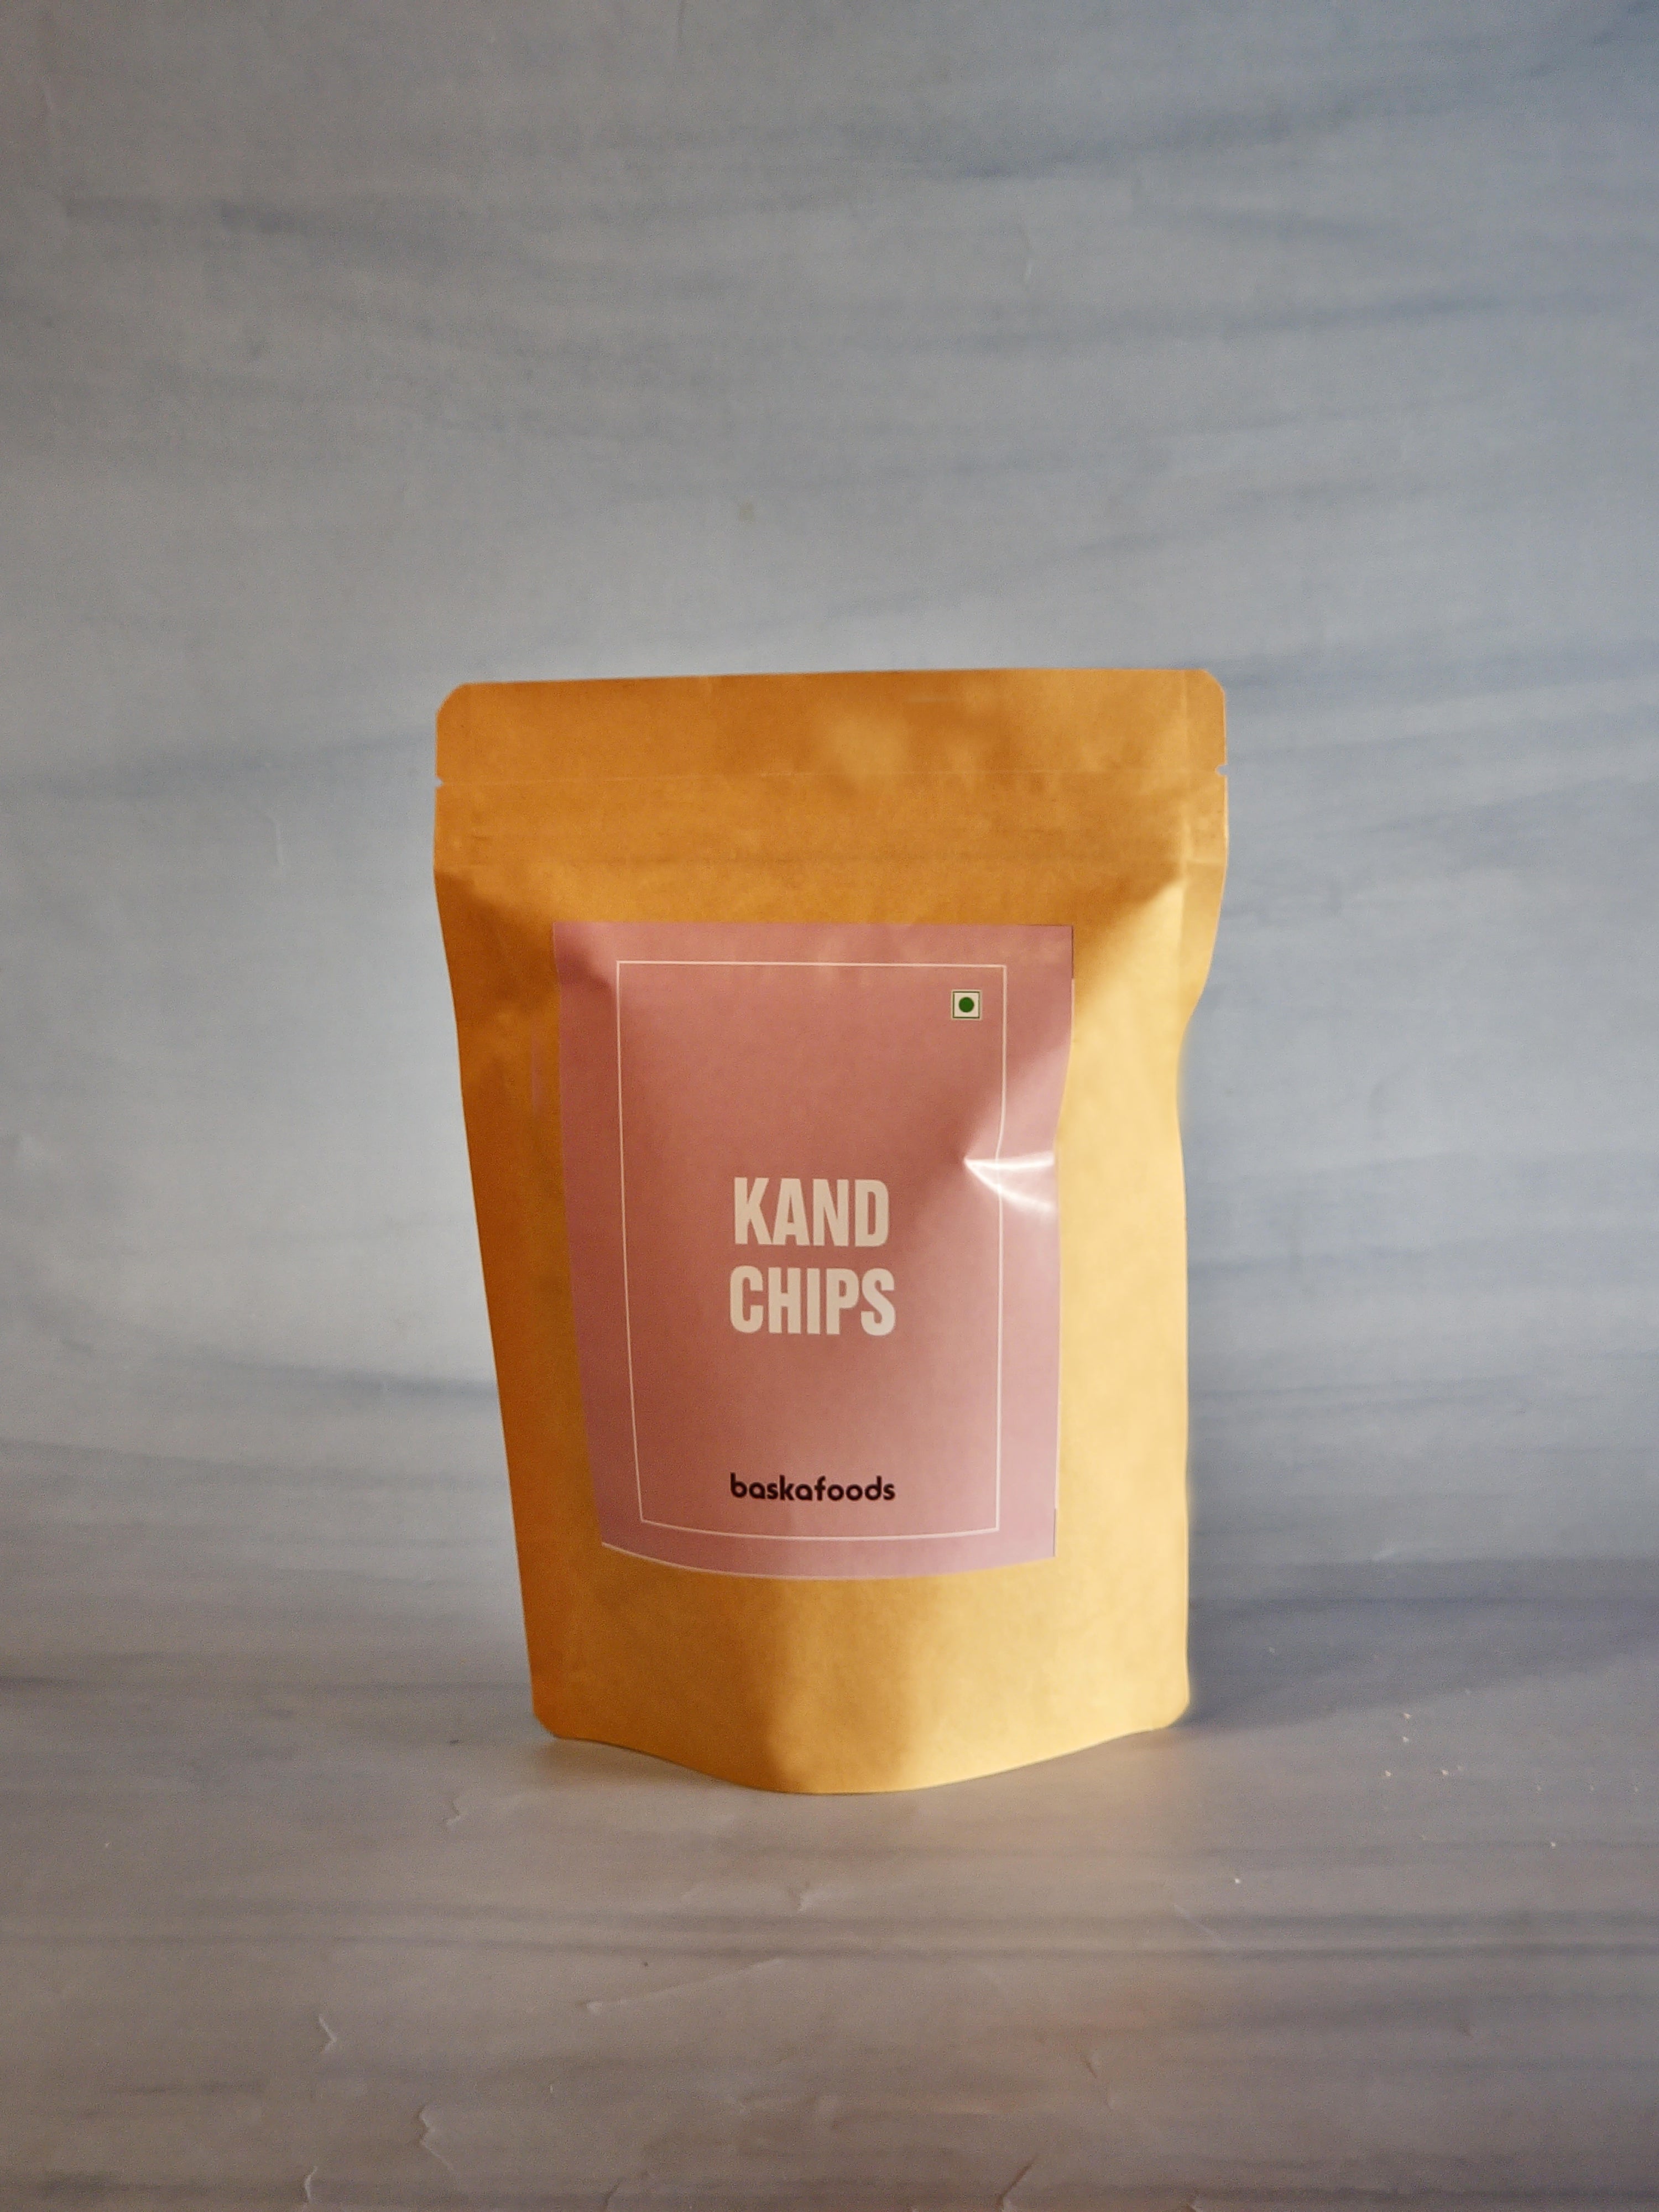 Kand Chips